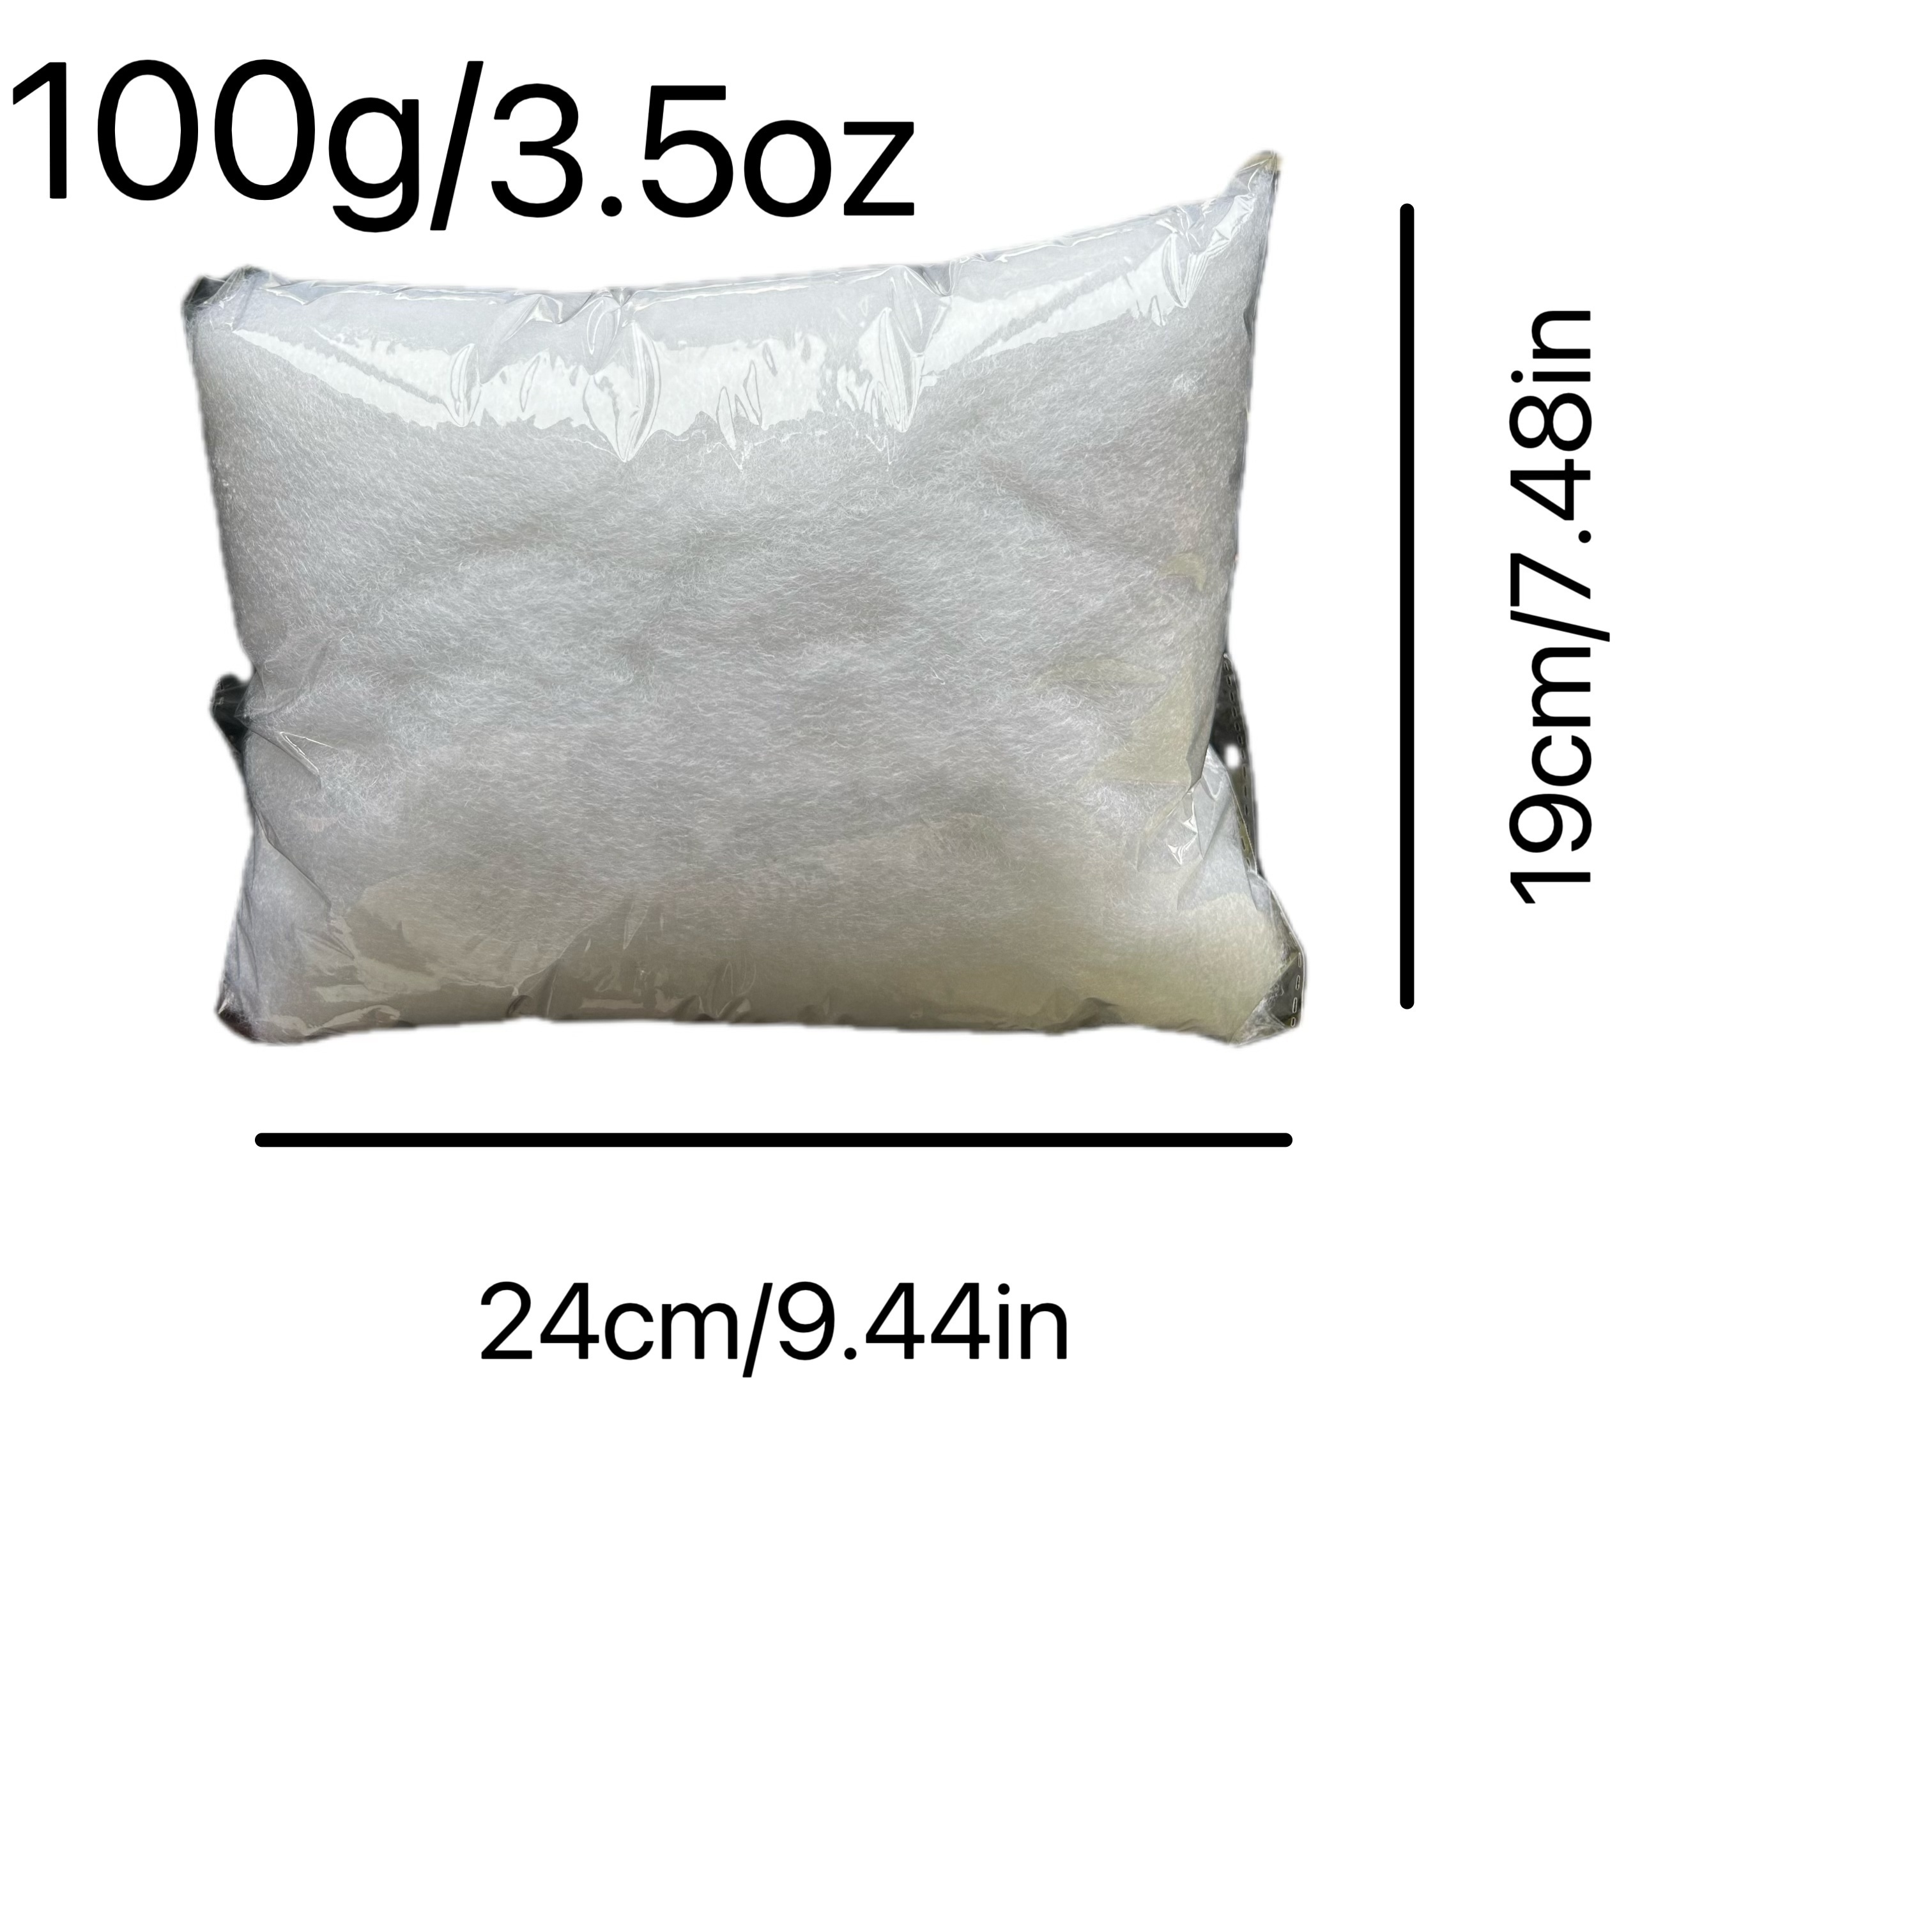 150g Soft Polyester Filling for Stuffed Animals, Pillows and Craft Projects, White